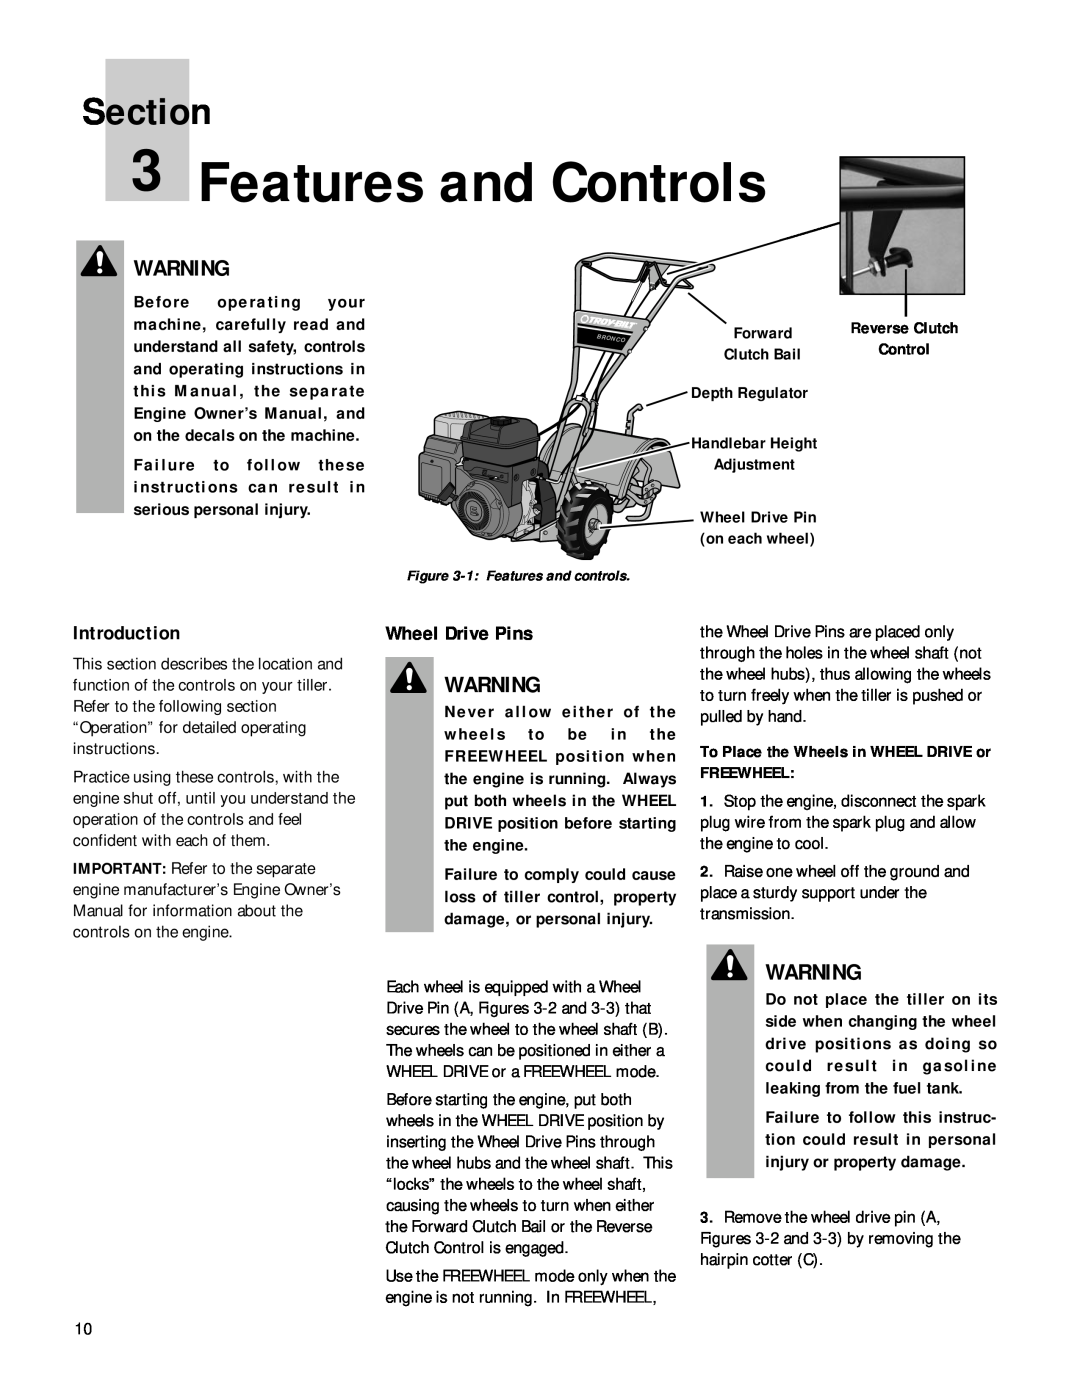 Bolens 12180 owner manual Features and Controls, Wheel Drive Pins, Section, Introduction, Forward, Clutch Bail, Adjustment 